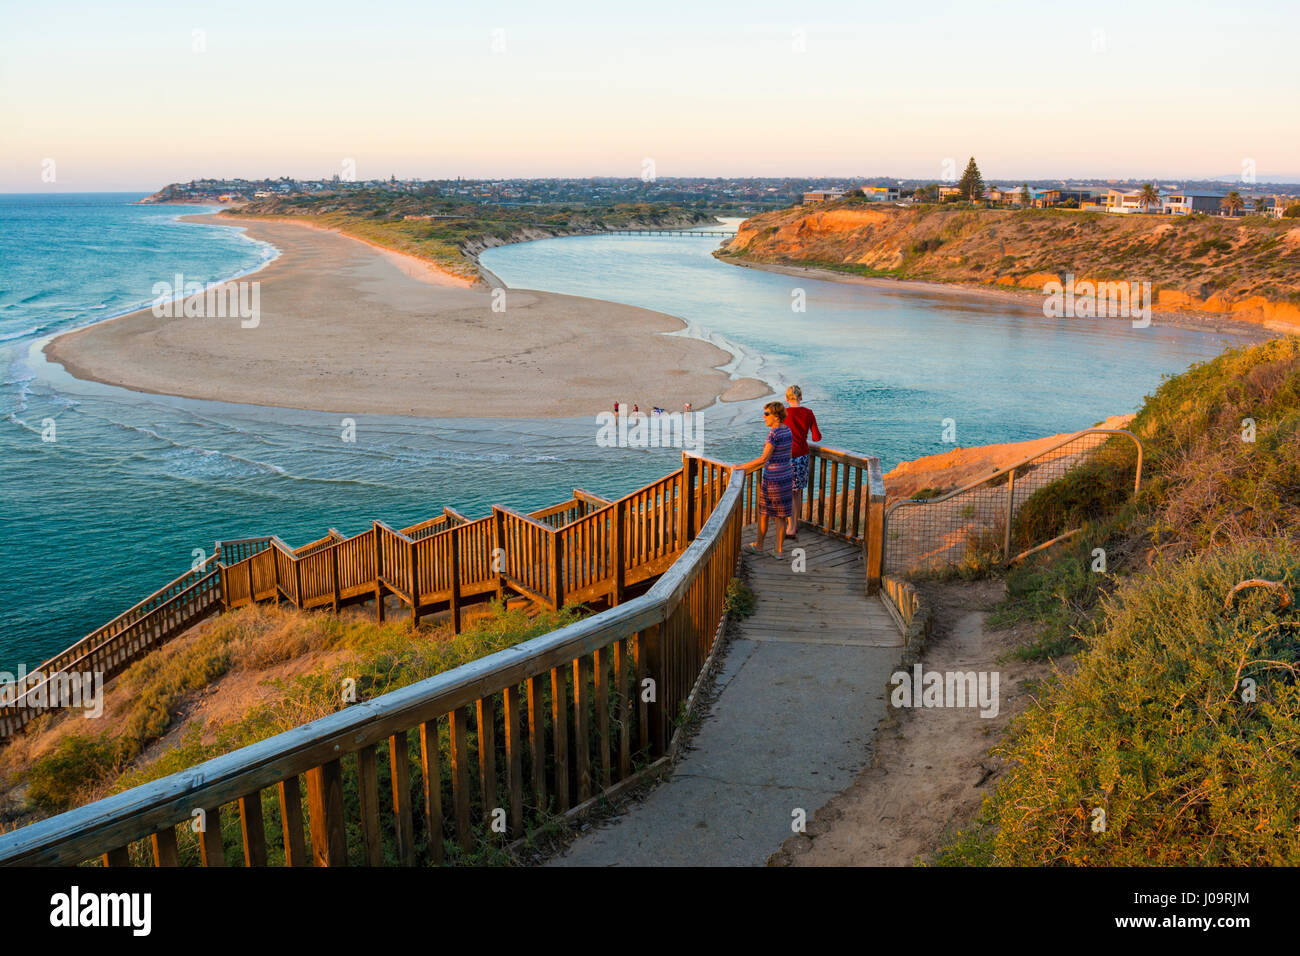 Southport Beach, South Australia, Australia - 4 March 2017 - Two women on the steps overlooking Onkaparinga River estuary at Port Noarlunga South Stock Photo